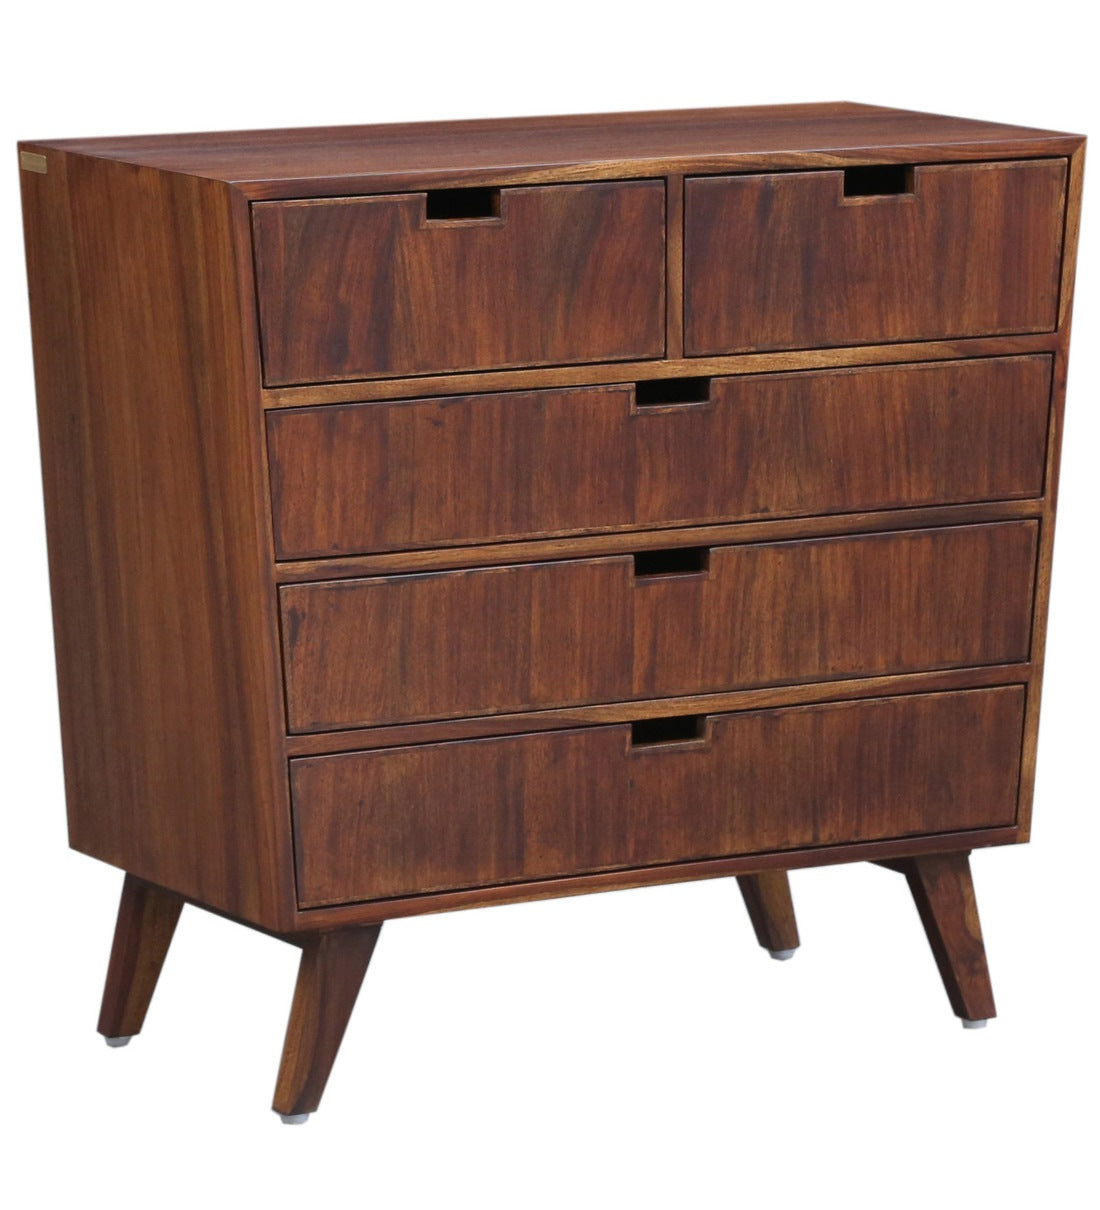 Polremo Wooden Chest of Drawers for Living Room in Provincial Teak Finish - Rajwada Furnish